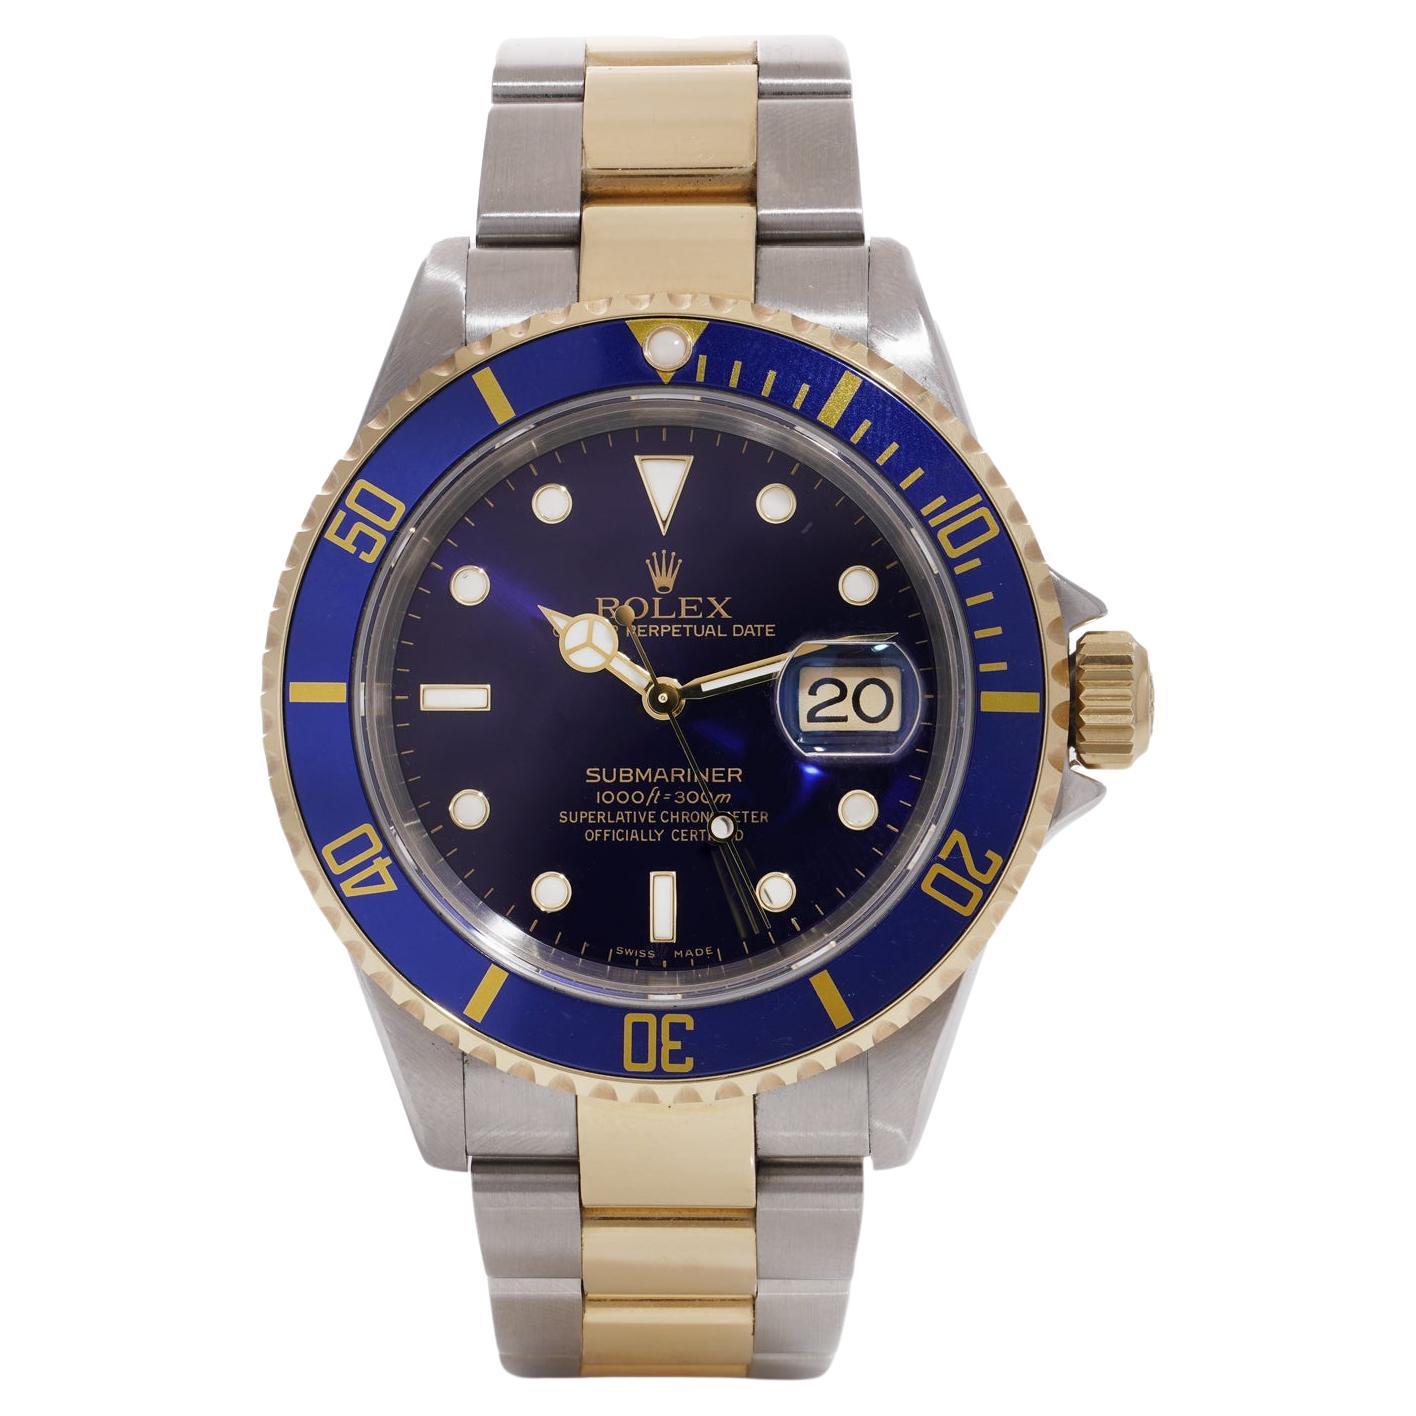 Rolex Submariner Oyster Perpetual Date Blue Dial, Ref. 16613 